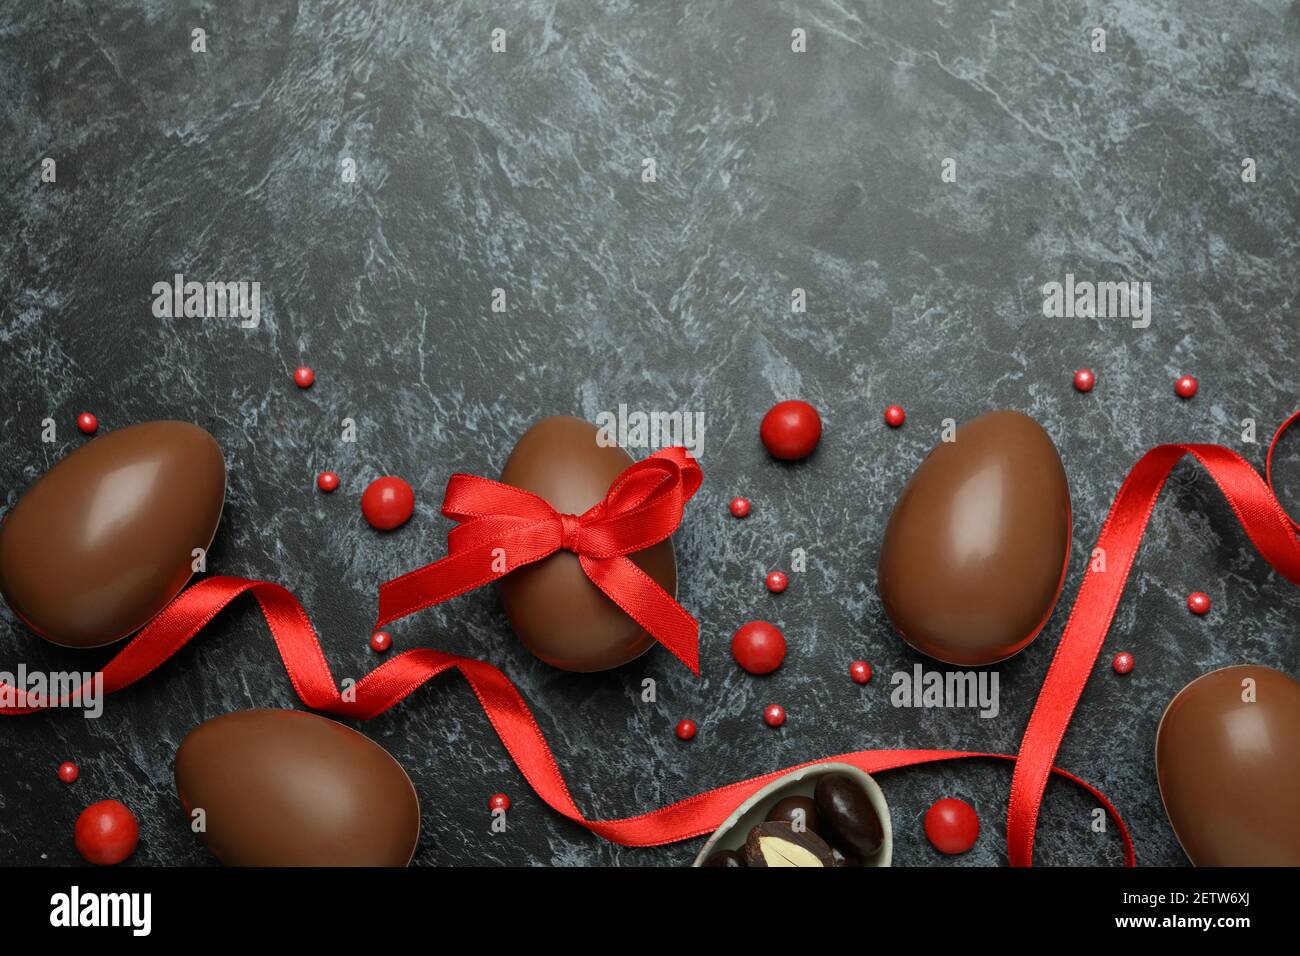 24,809 Red Chocolate Eggs Images, Stock Photos & Vectors